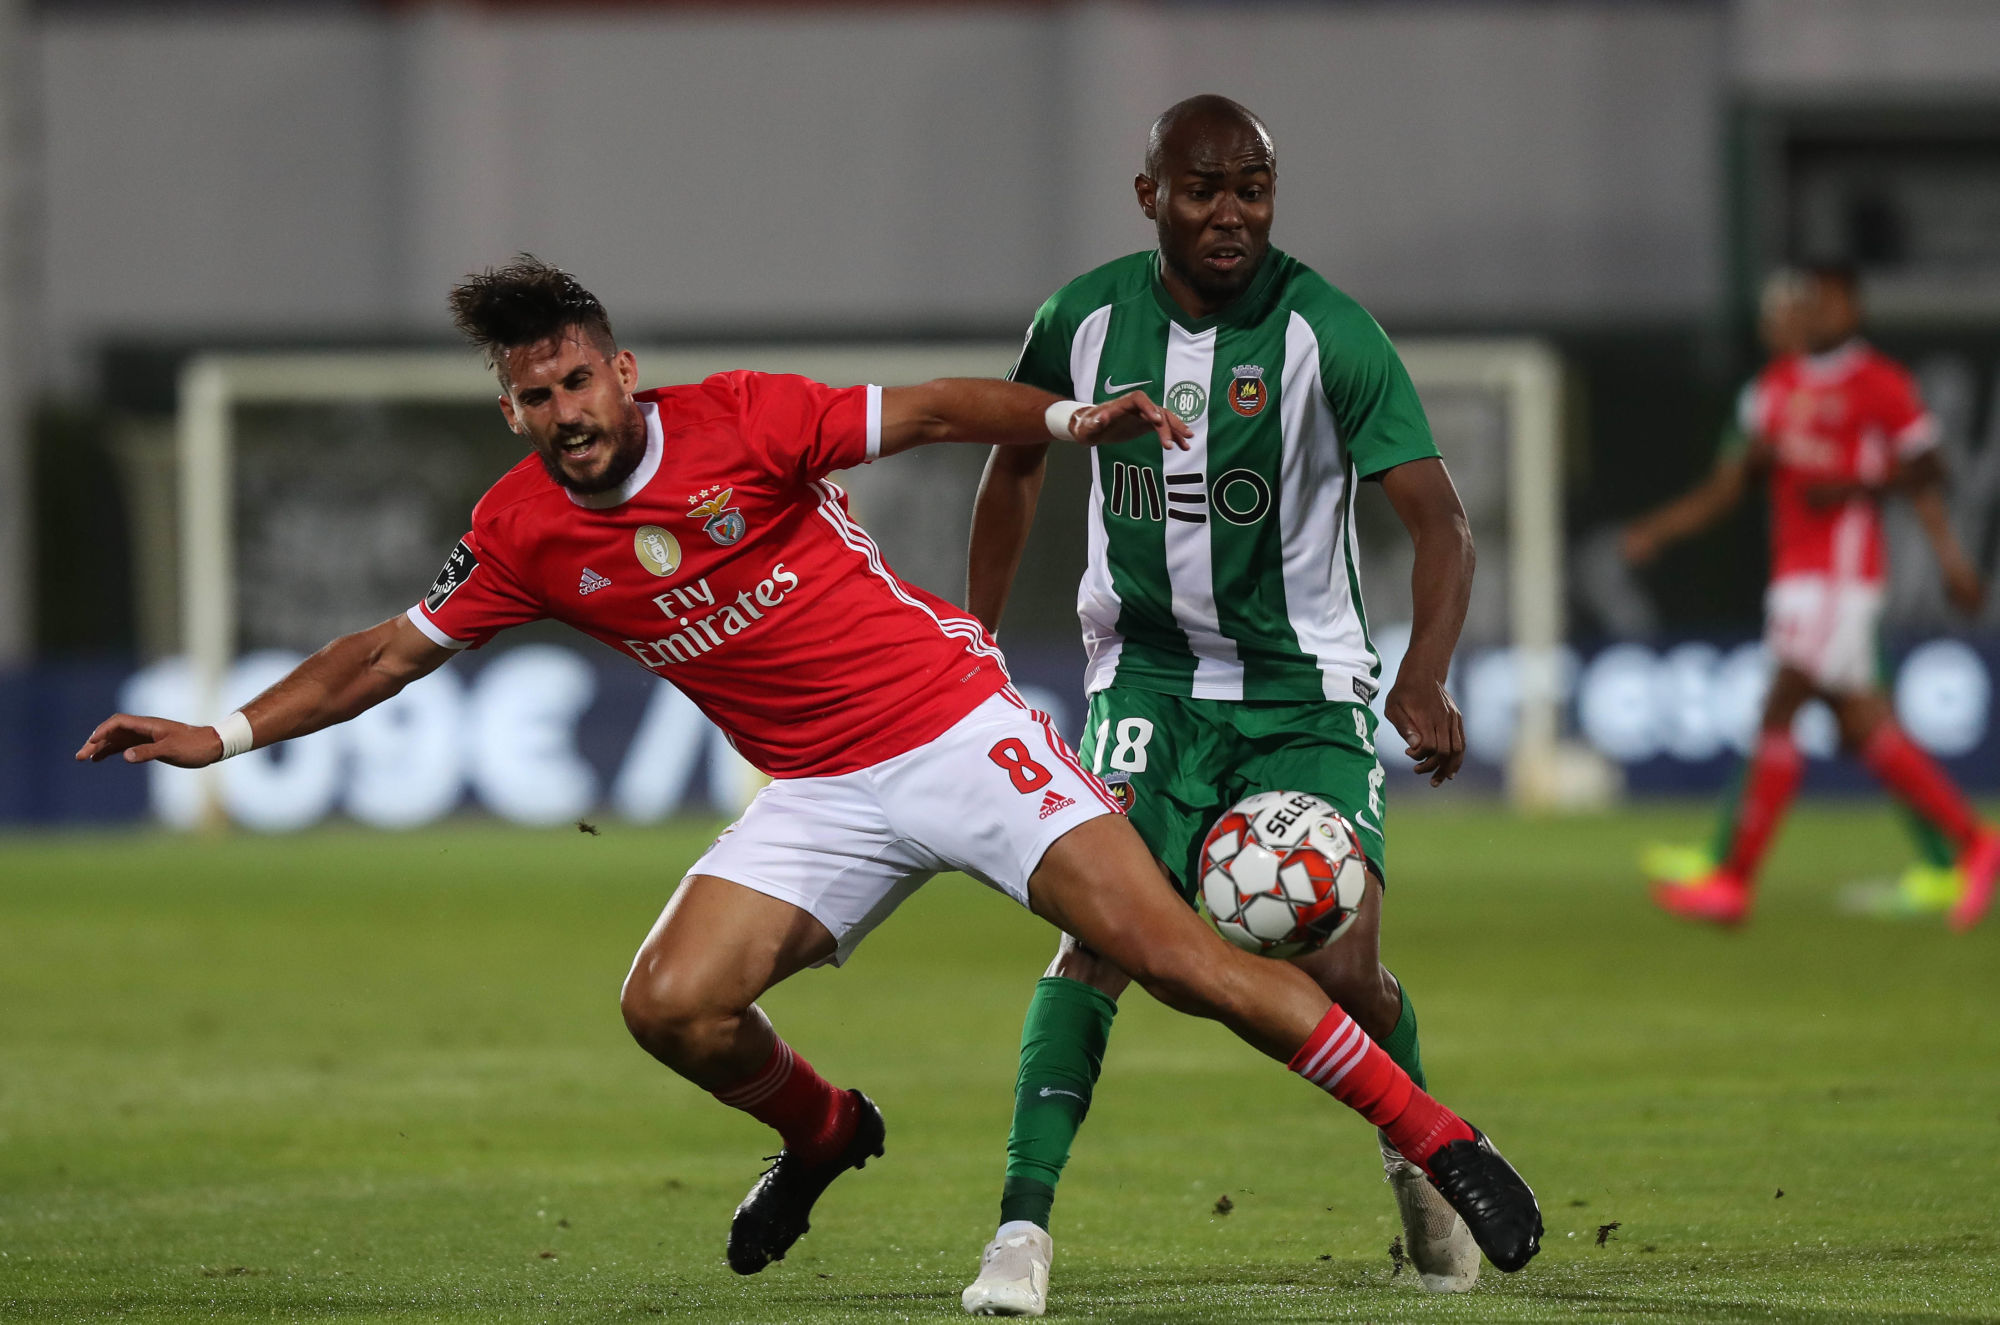 Vila do Conde, 06/17/2020 - Rio Ave Futebol Clube hosted Sport Lisboa e Benfica tonight, at Rio Ave Stadium, in a match of the 27th round of the 2019/20 I Liga. Gabriel and Al Musrati (Ivan Del Val / Global Images) 
By Icon Sport - Vila do Conde (Portugal)